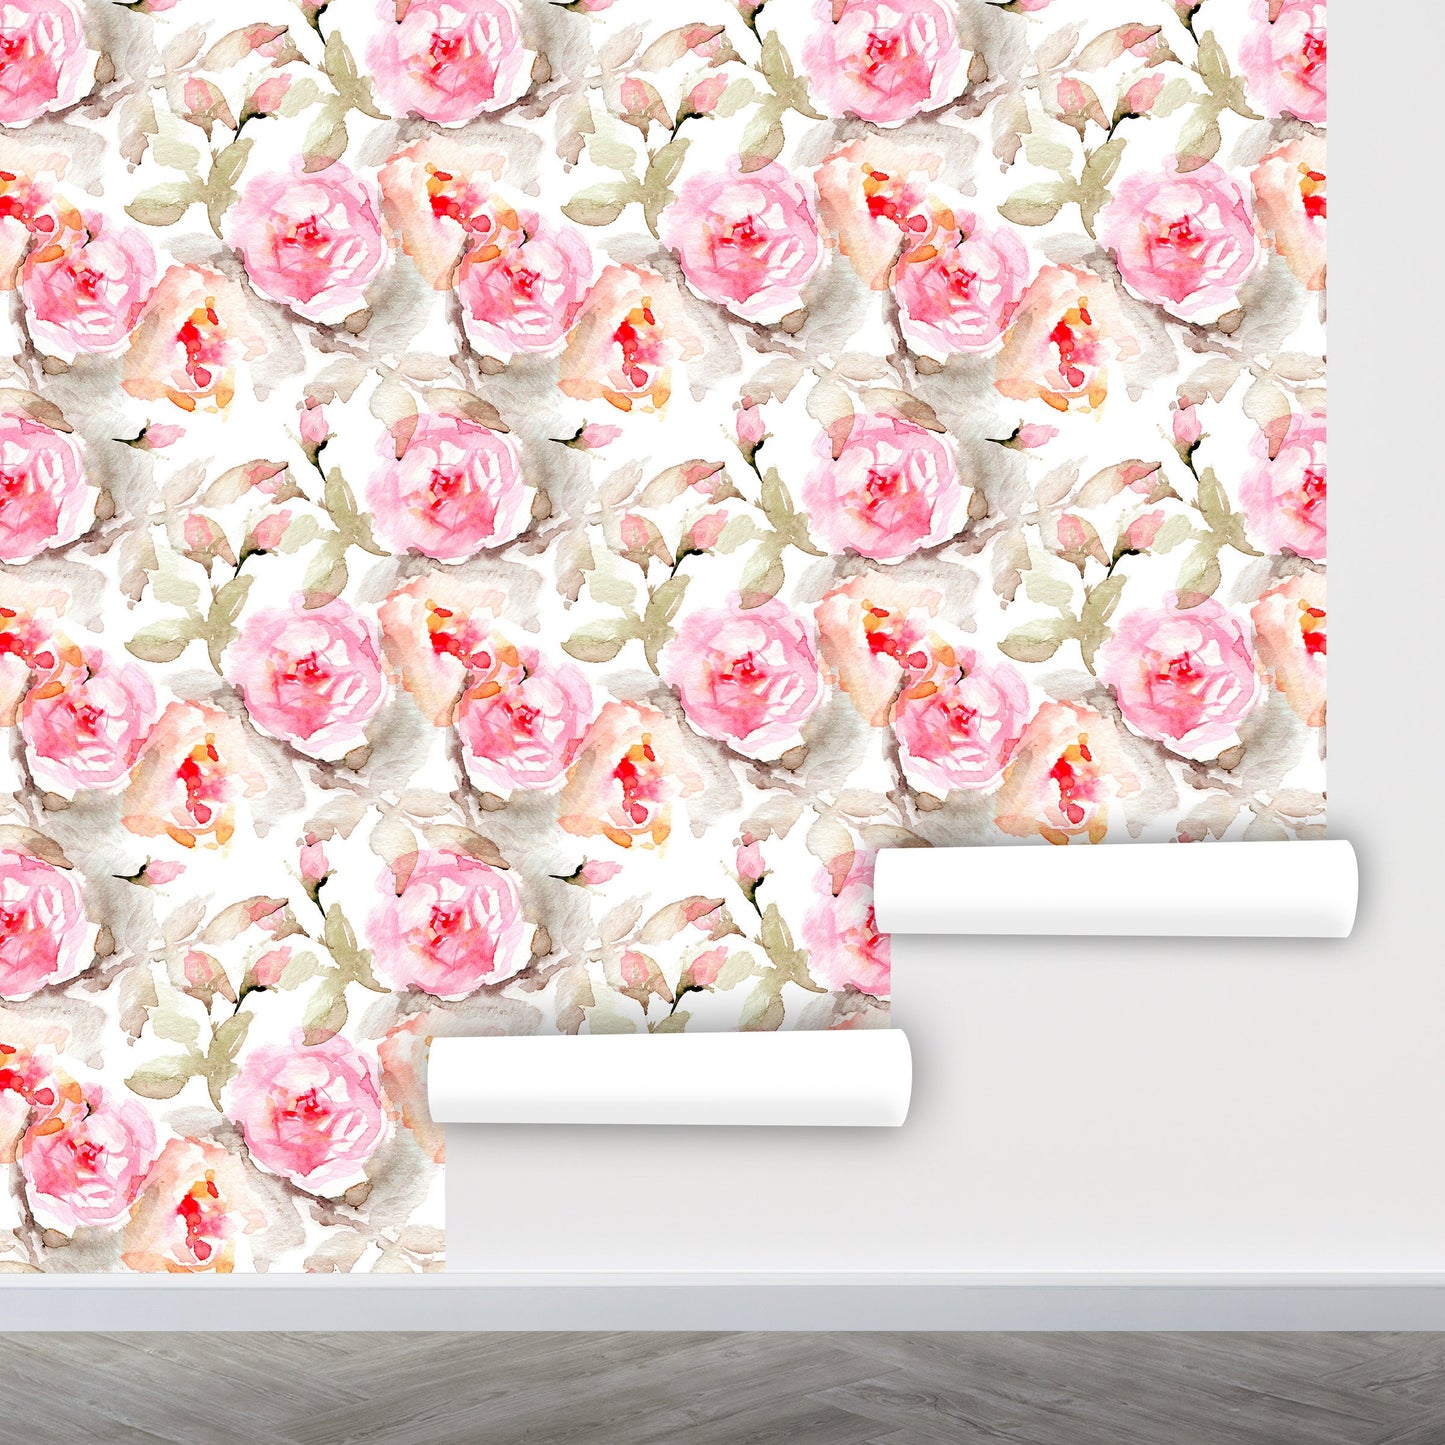 Rose Wallpaper Peel and Stick, Pink Floral Wallpaper, Watercolor Wallpaper, Removable Wall Paper